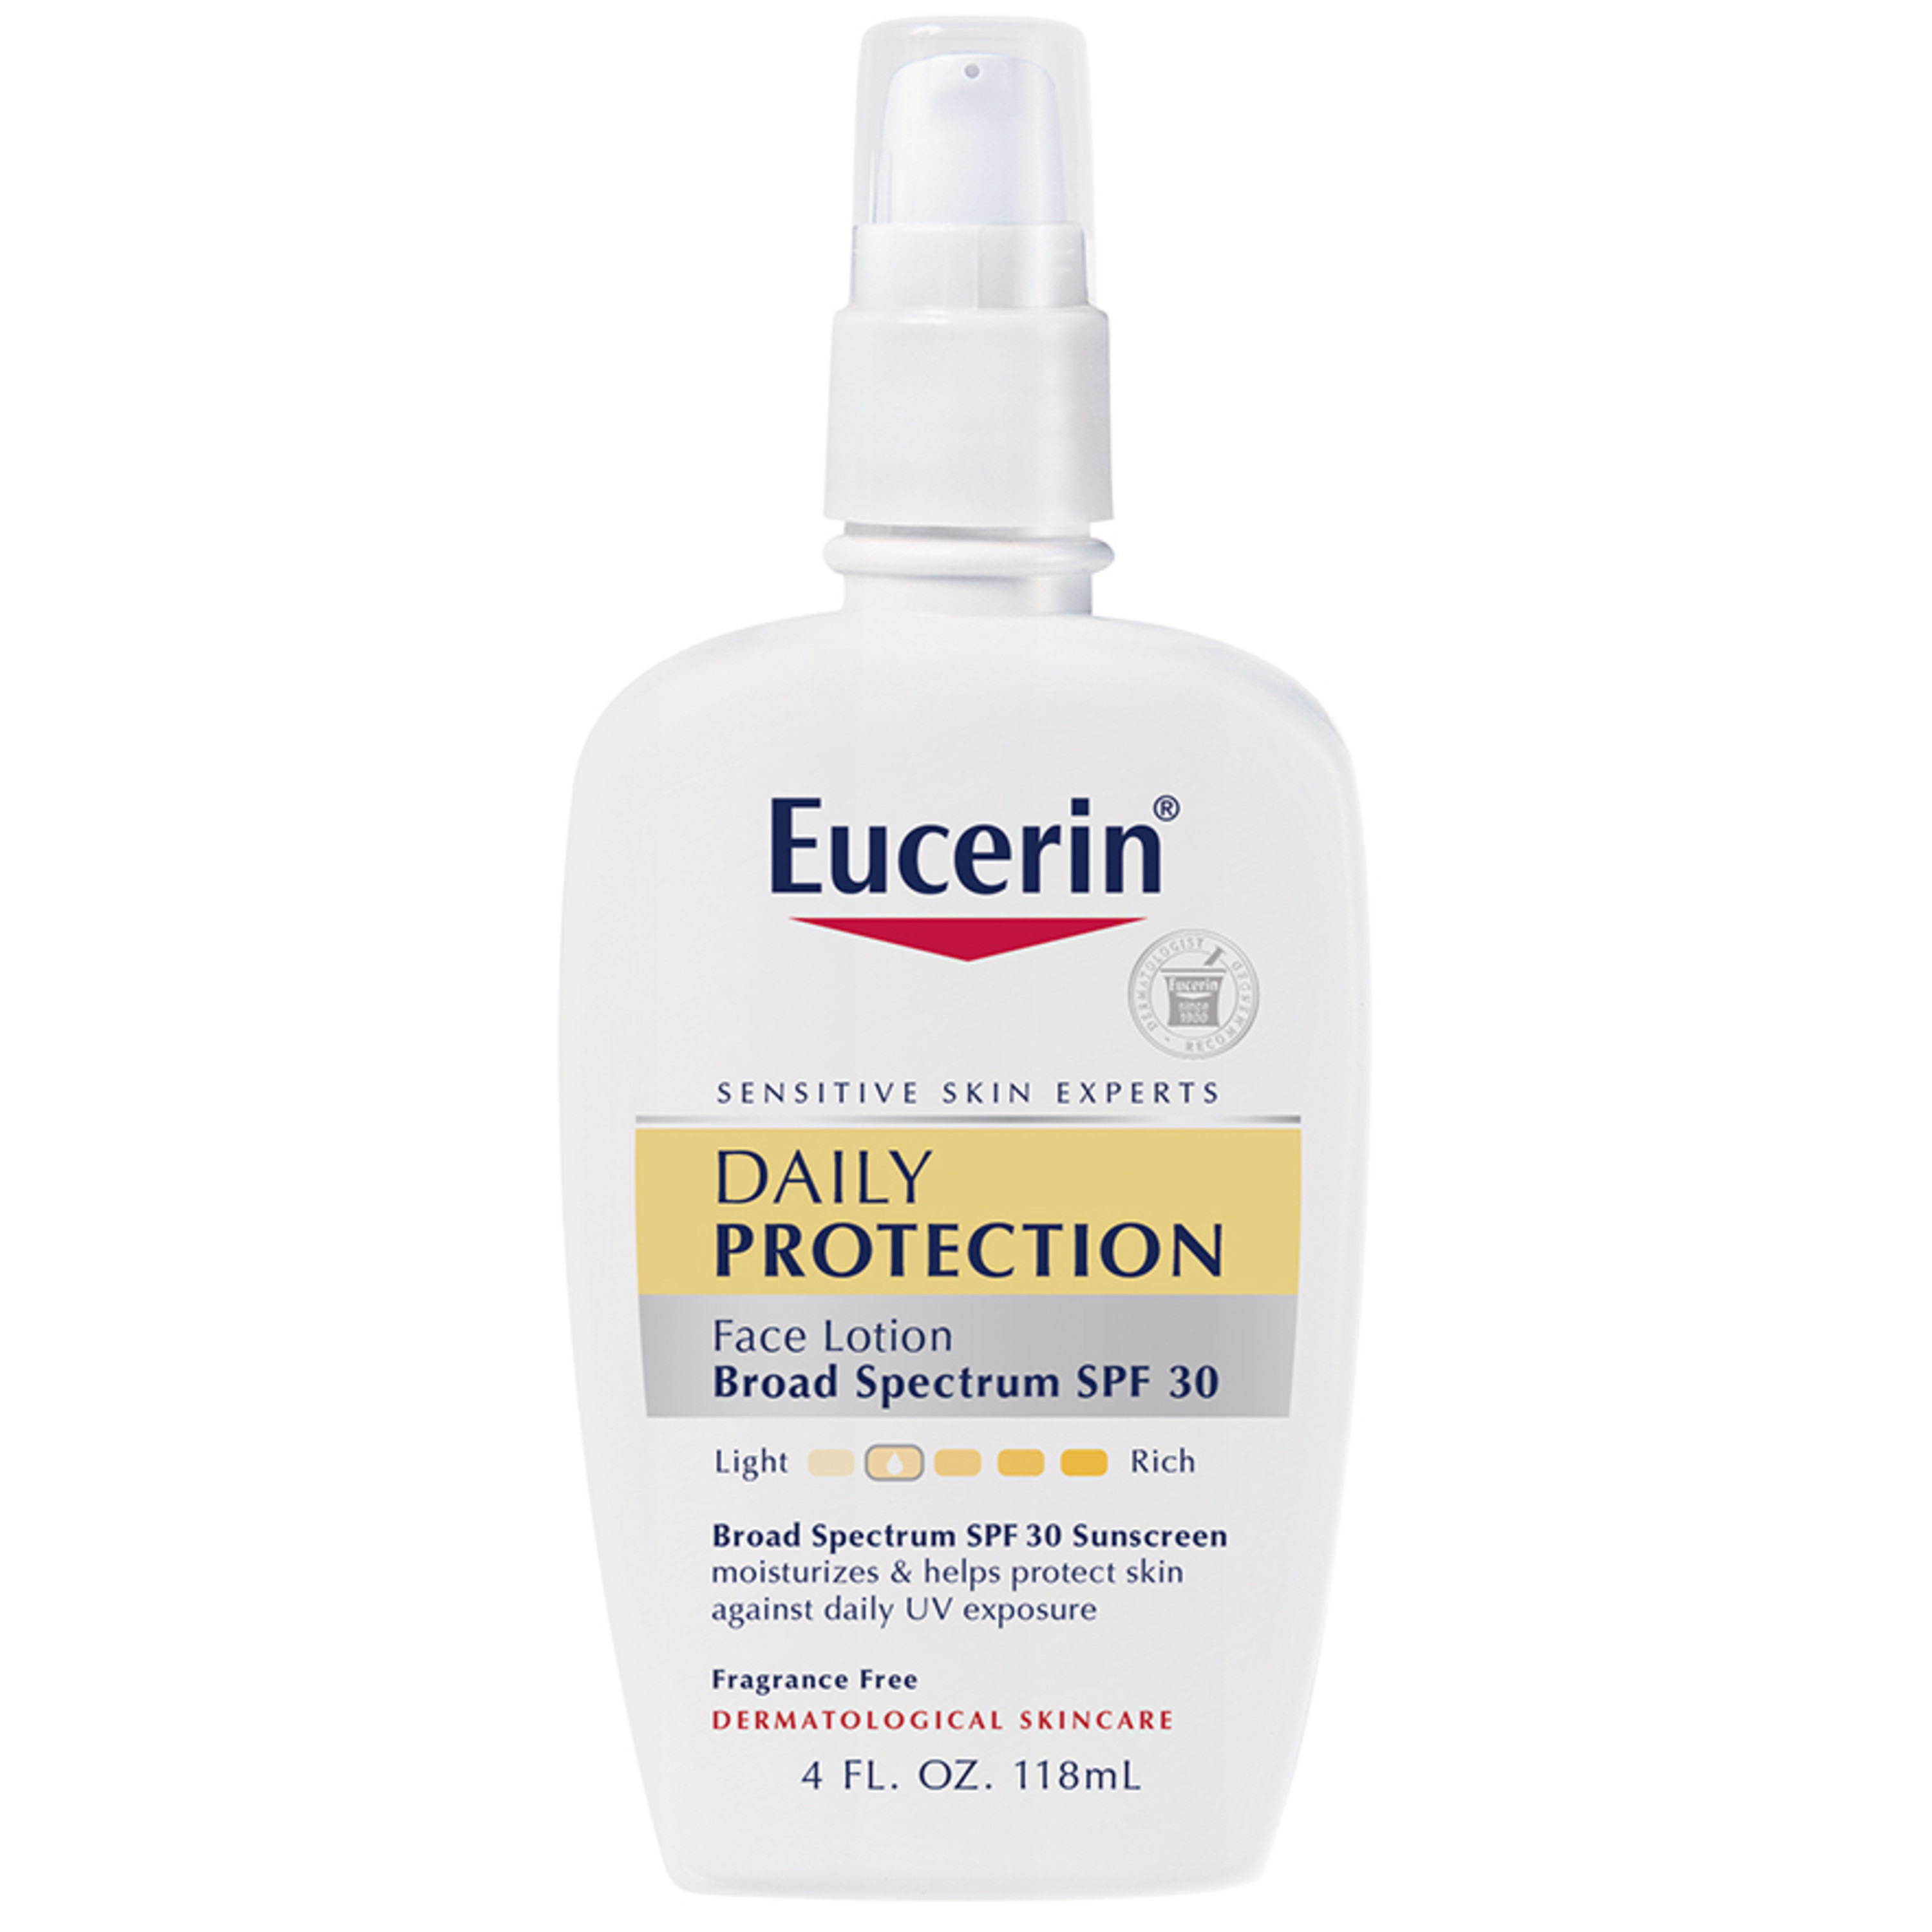 Eucerin Daily Protection Face Lotion with SPF 30, For Sensitive Skin, 4 Fl. Oz. Bottle - image 1 of 8